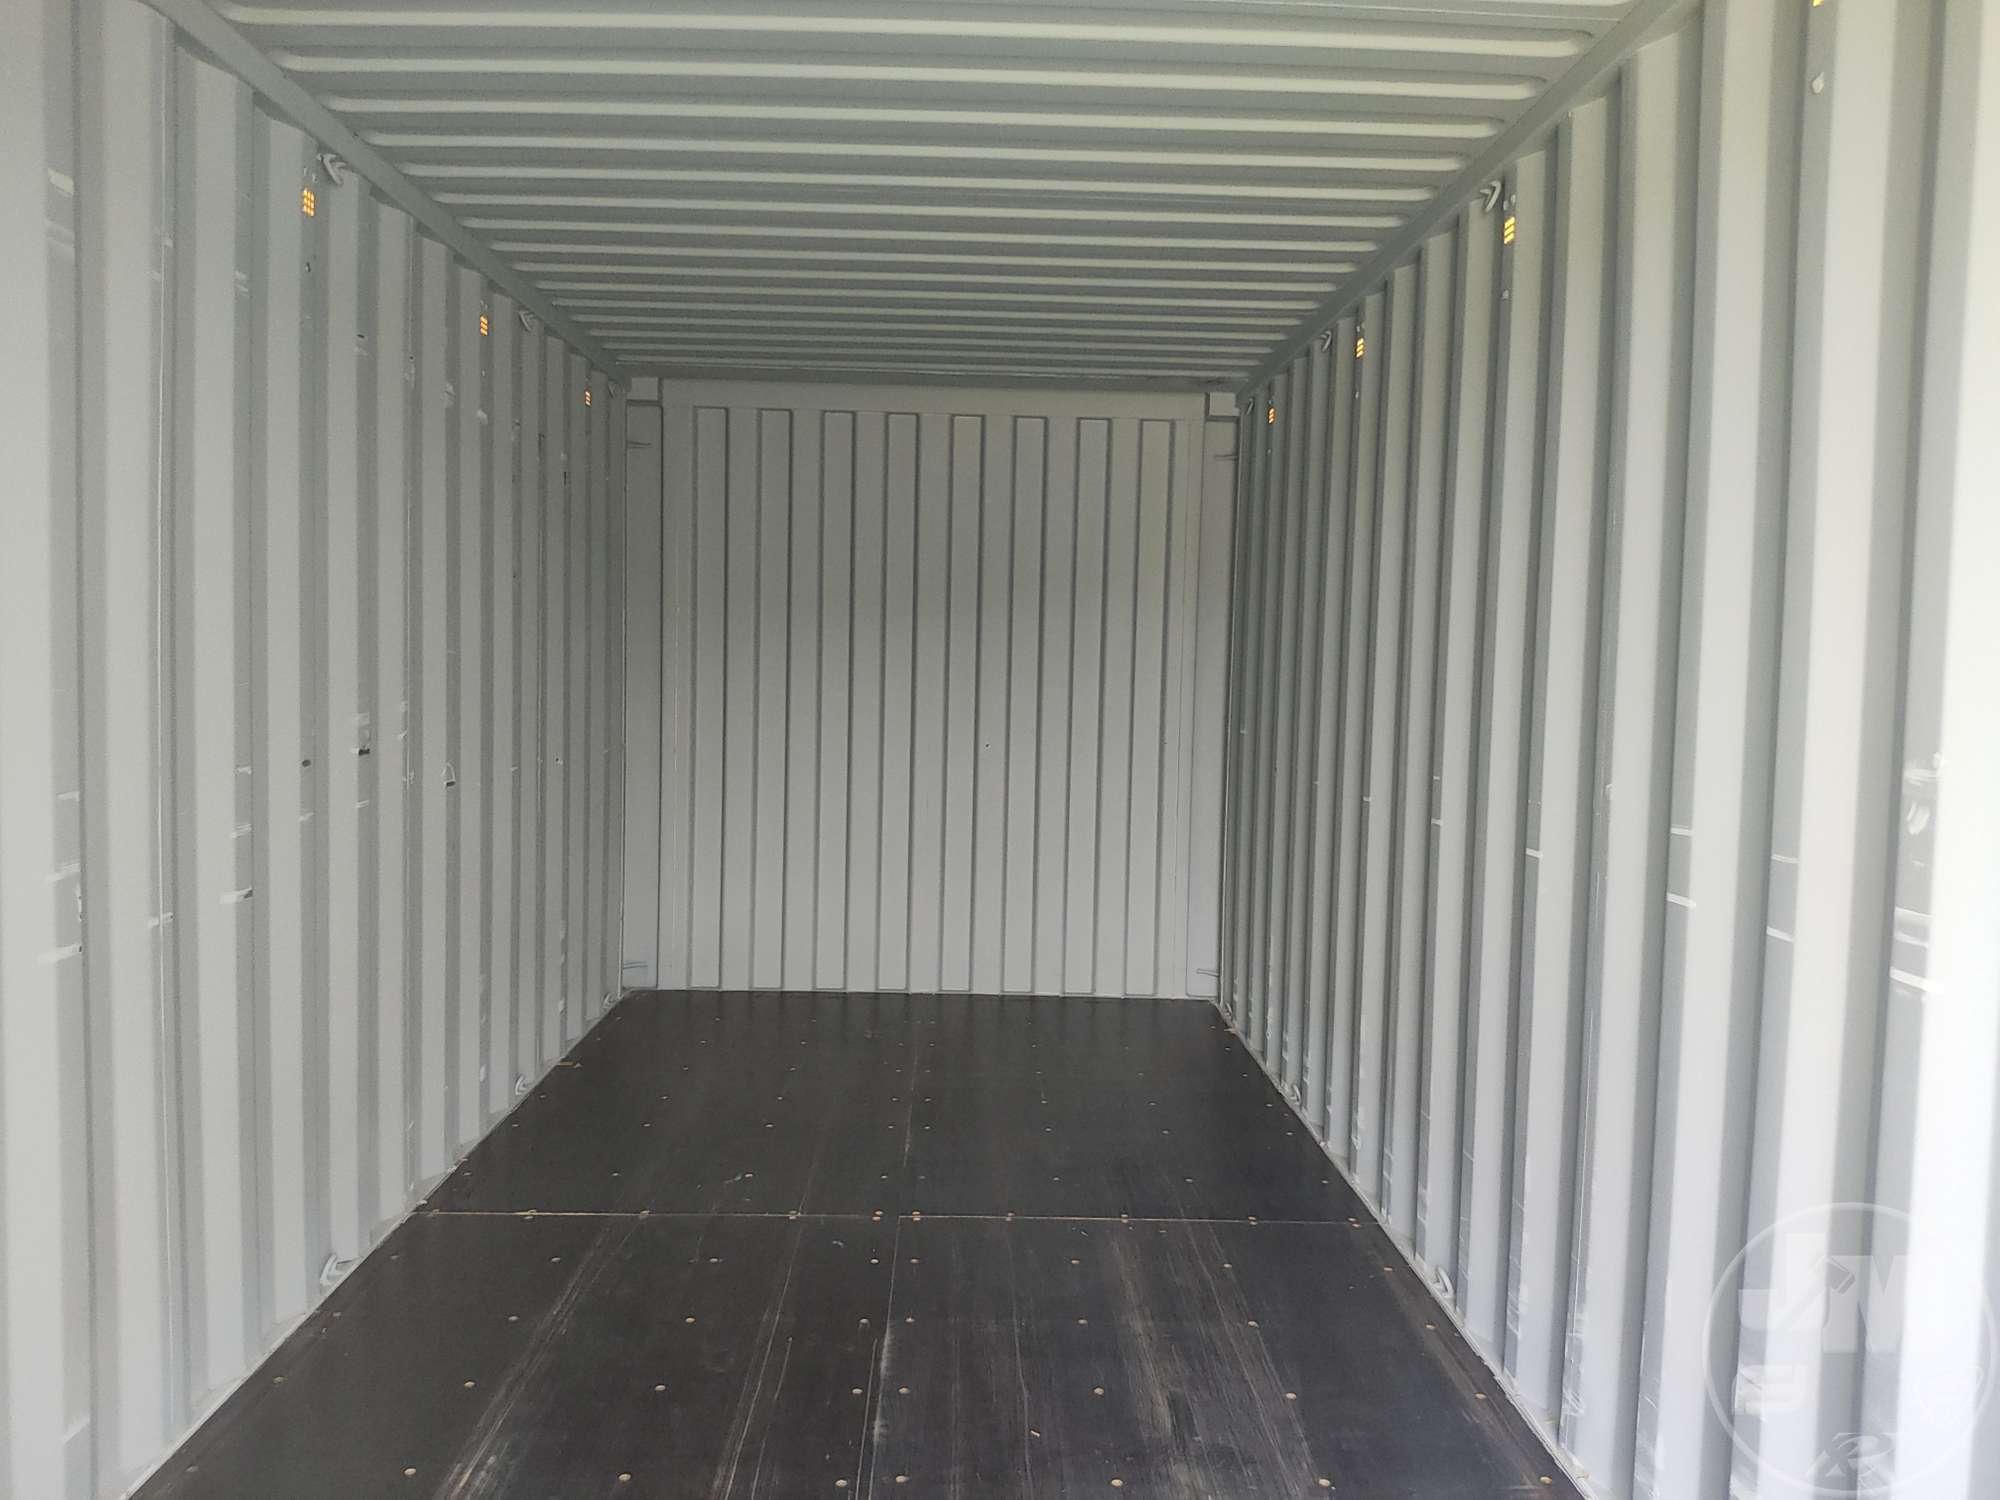 2022 WNG CONTAINER  20' CONTAINER SN: WNGU2235855